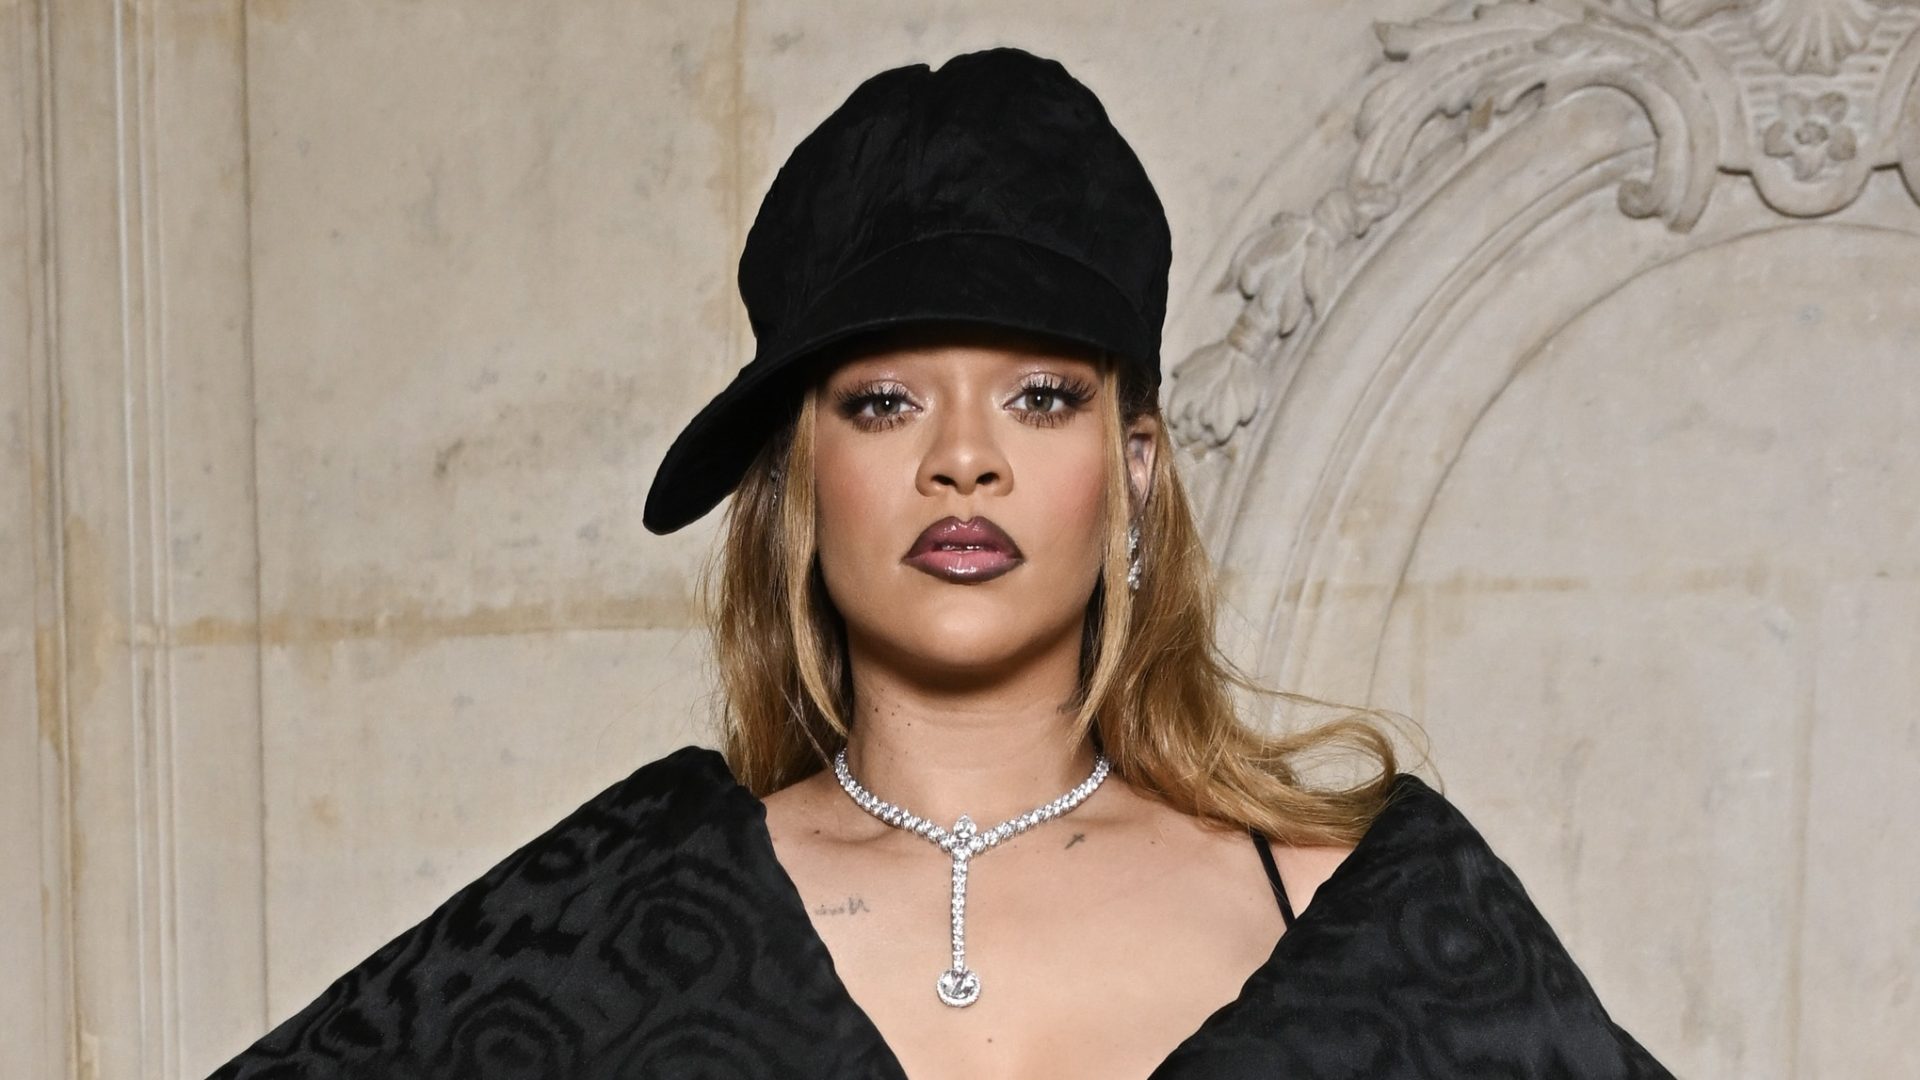 Whew! Rihanna Goes Viral After Posing In Sultry Nun Attire For Latest Magazine Cover (PHOTOS) thumbnail